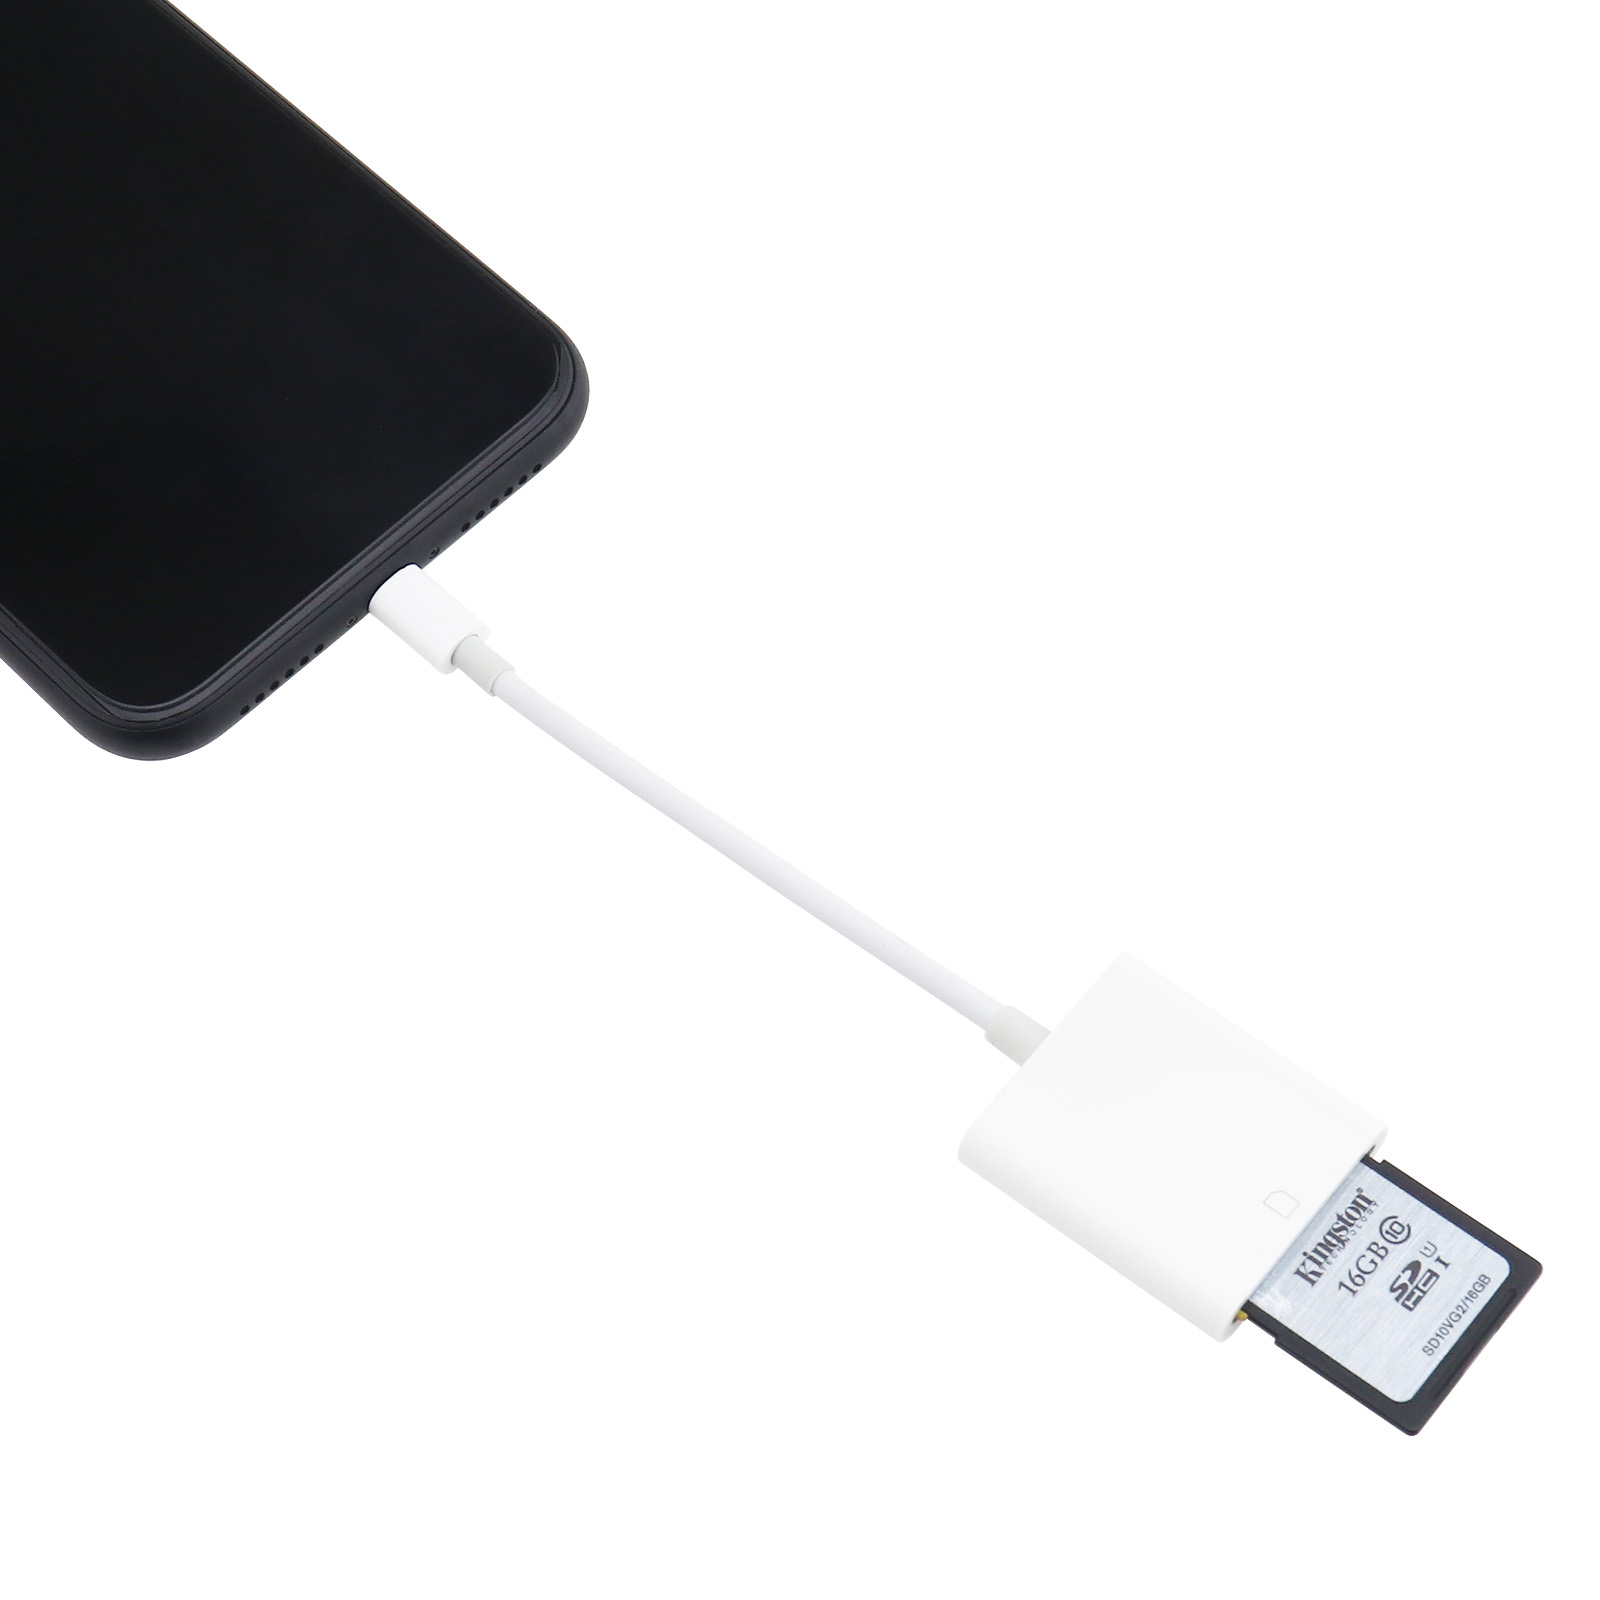 Read more about the article How to Transfer Photos from SD Card to Your iPhone or iPad